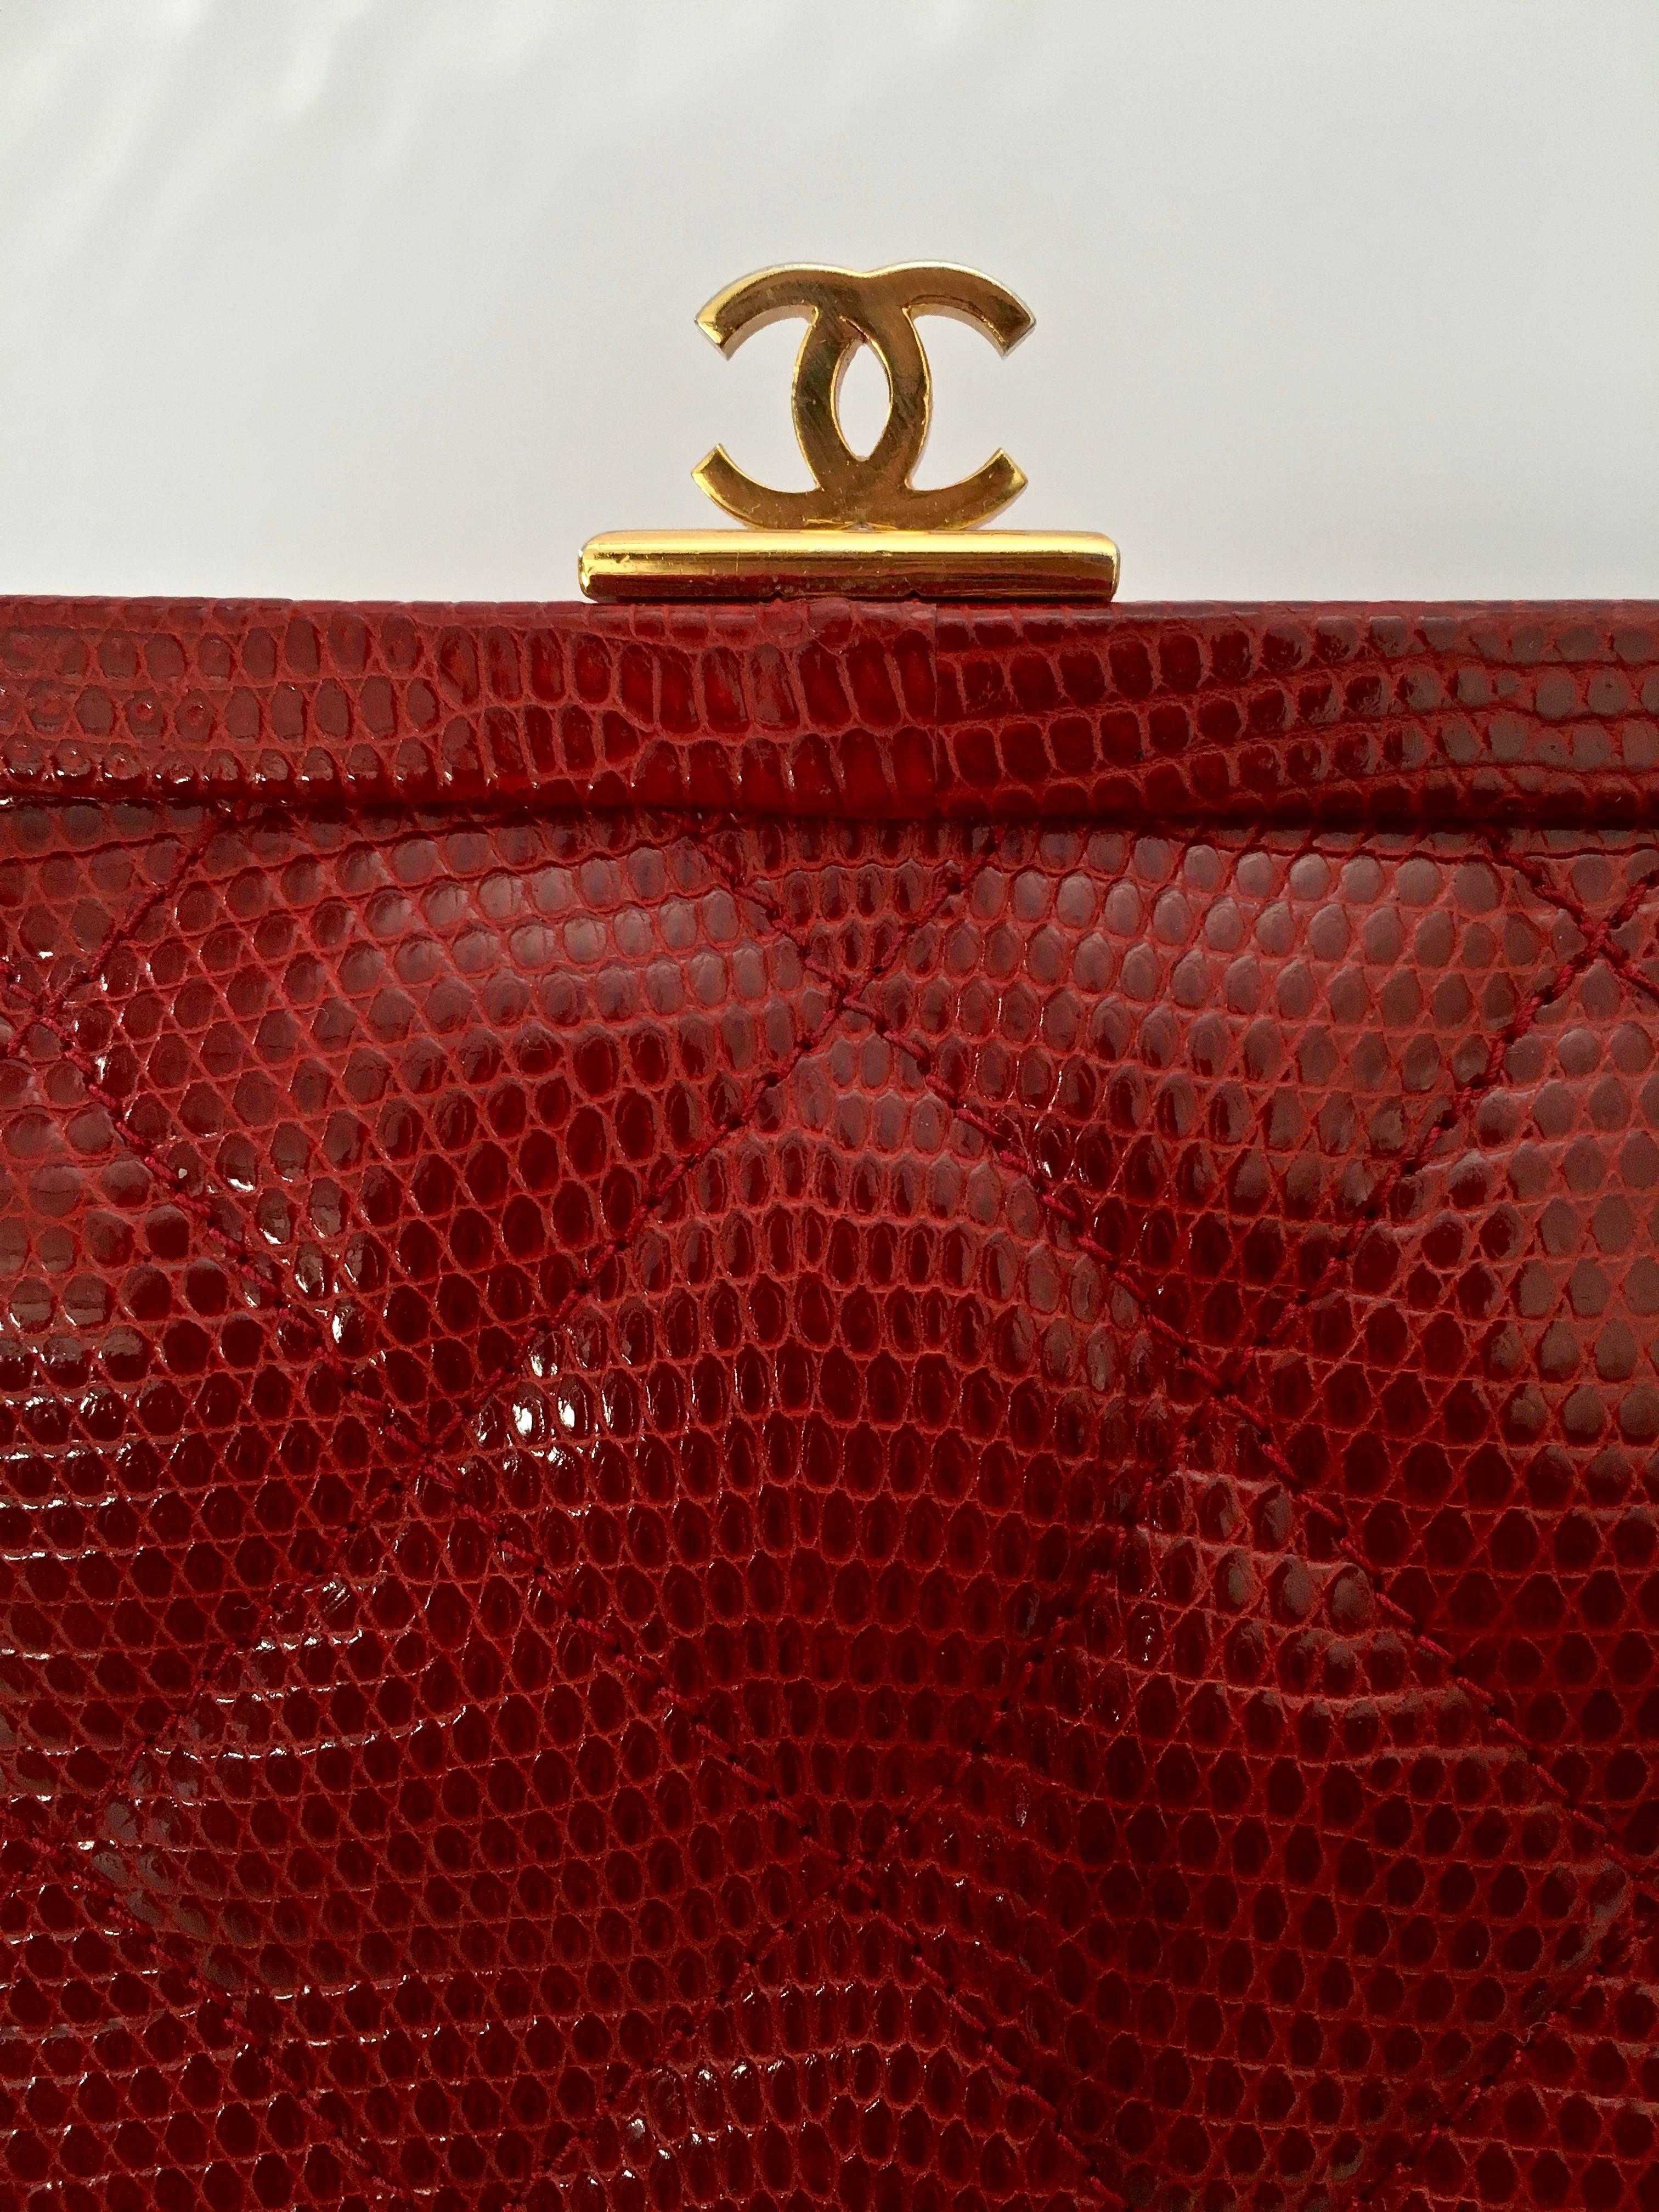 French Vintage Quilted Chanel Red Lizard Leather Clutch, with Shoulder Chain